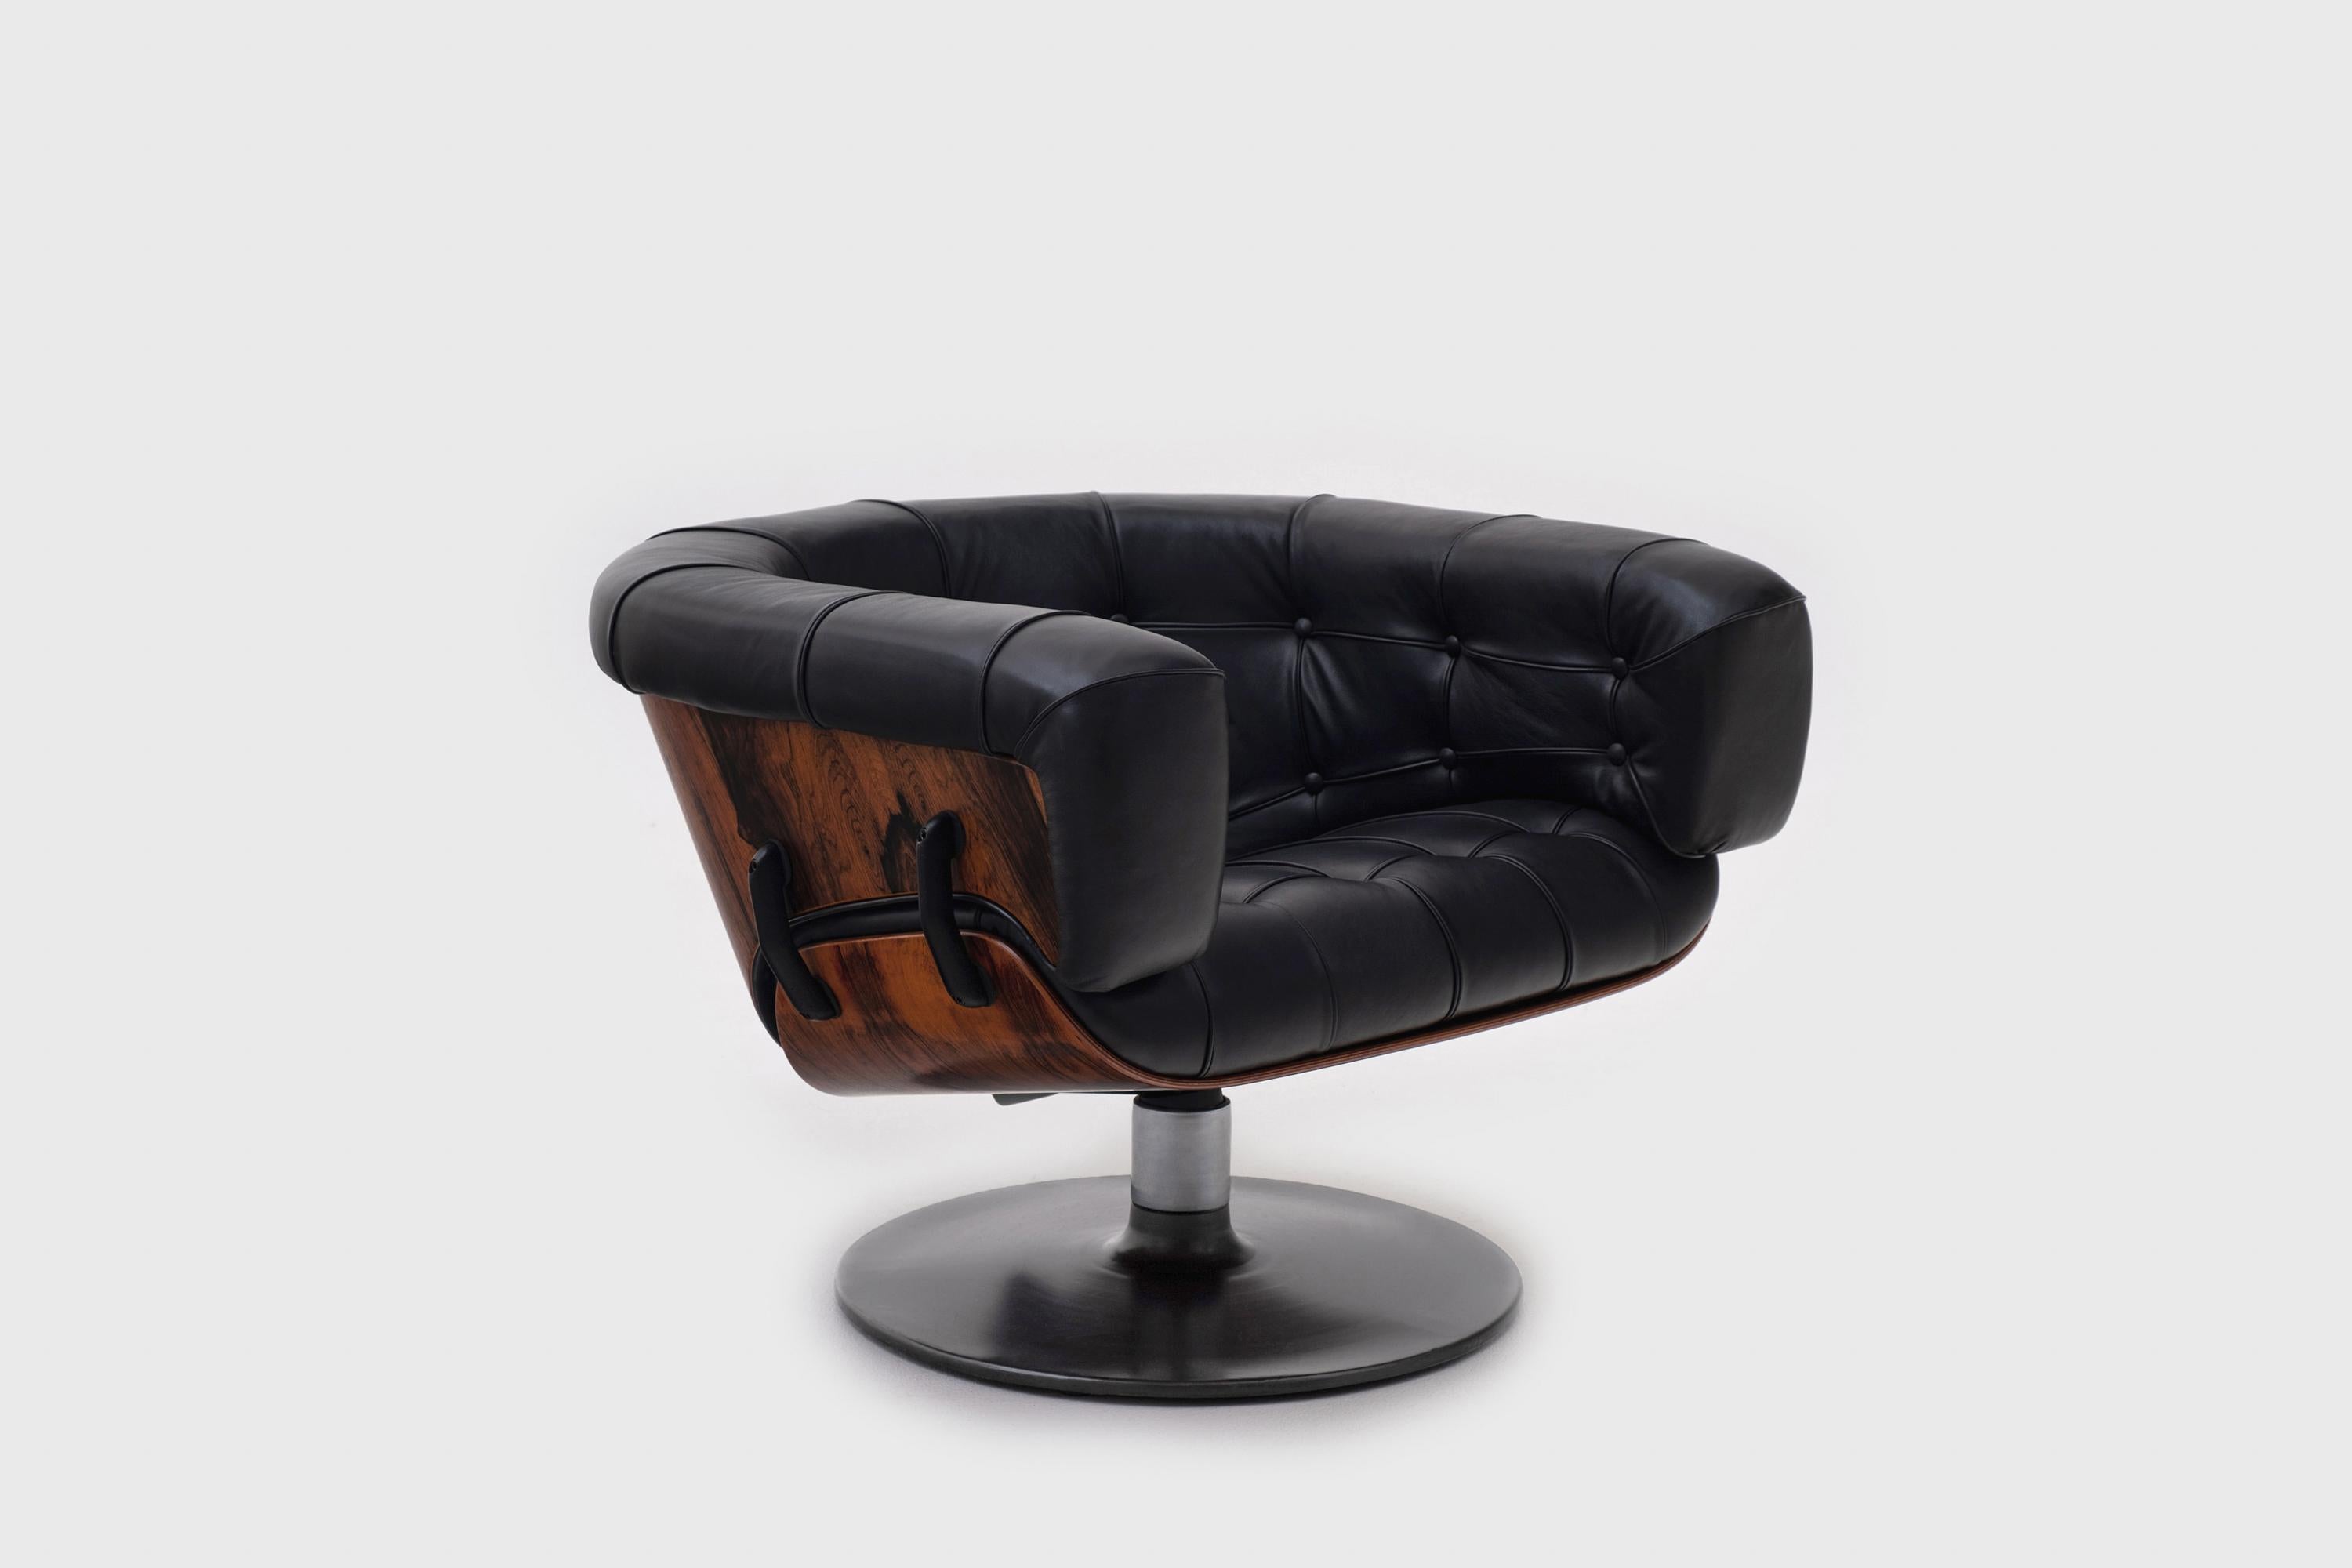 Stunning lounge chair by Martin Grierson for Arflex, Italy, circa 1960. Beautiful curved Rosewood shells and smooth leather upholstery. The shells are hold together by strong cast aluminium joints, round swivel base out of anthracite lacquered